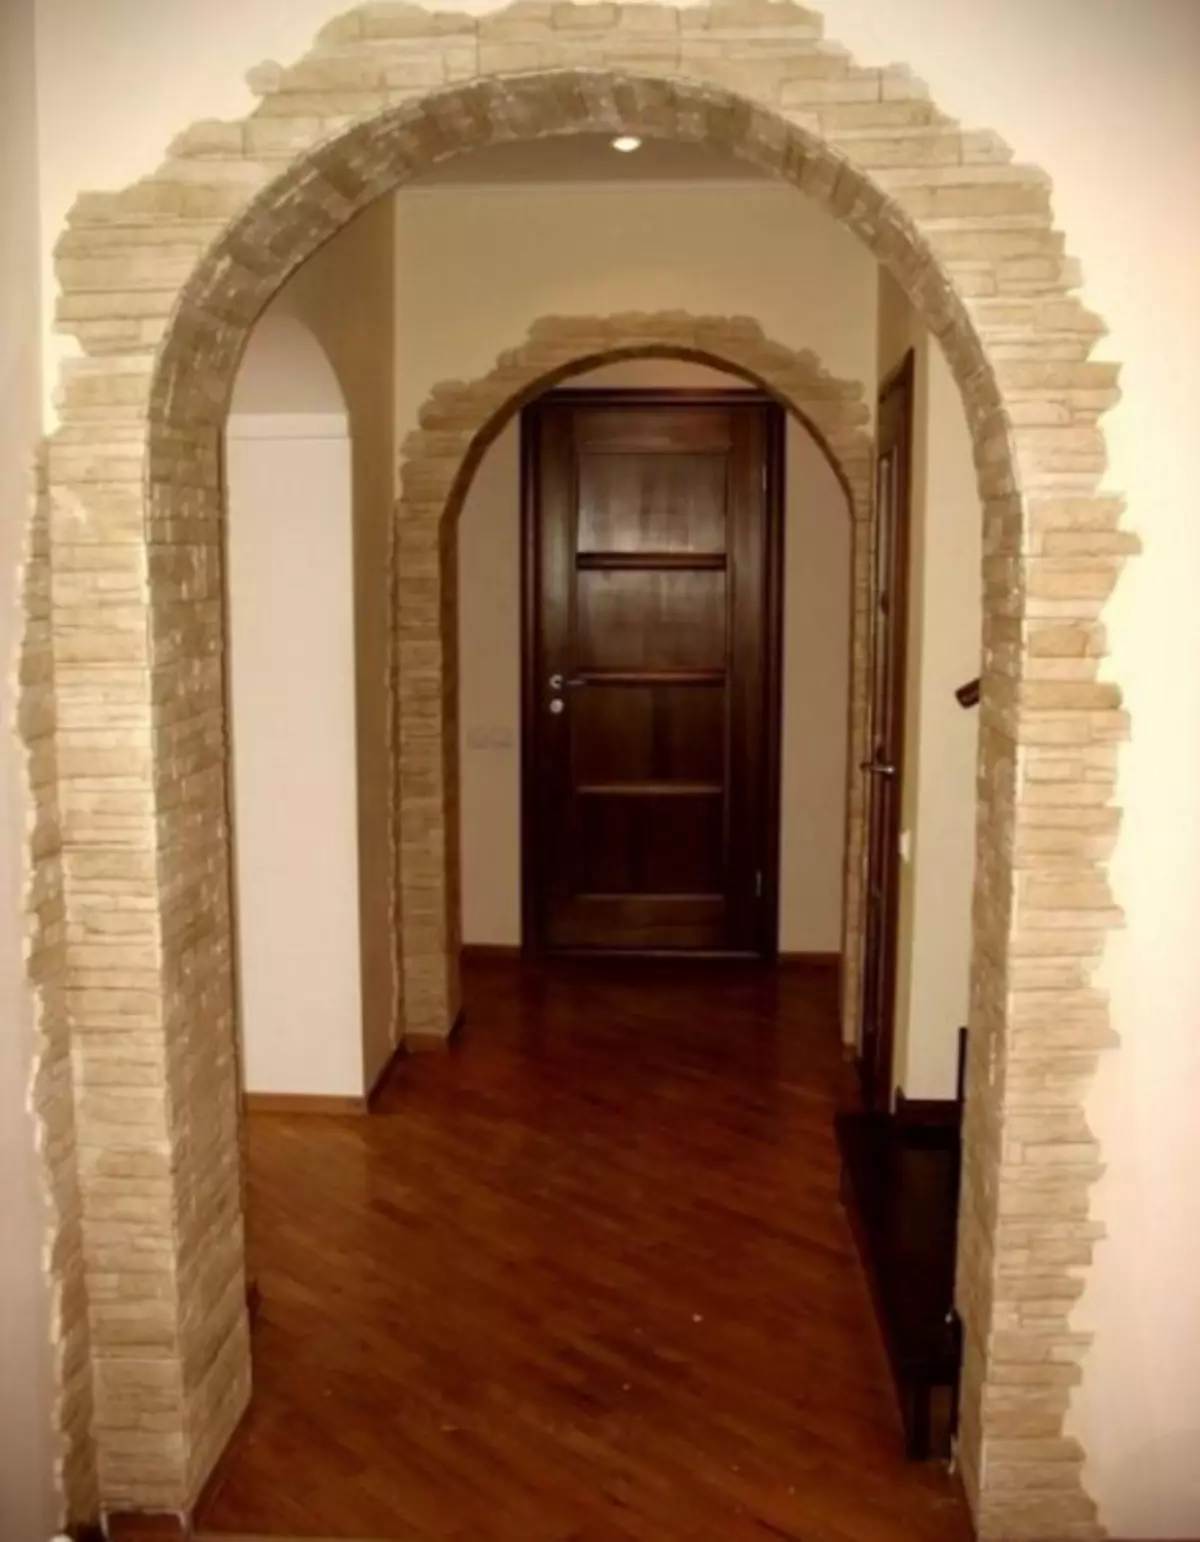 Homemade arch in the doorway: instruction how to make